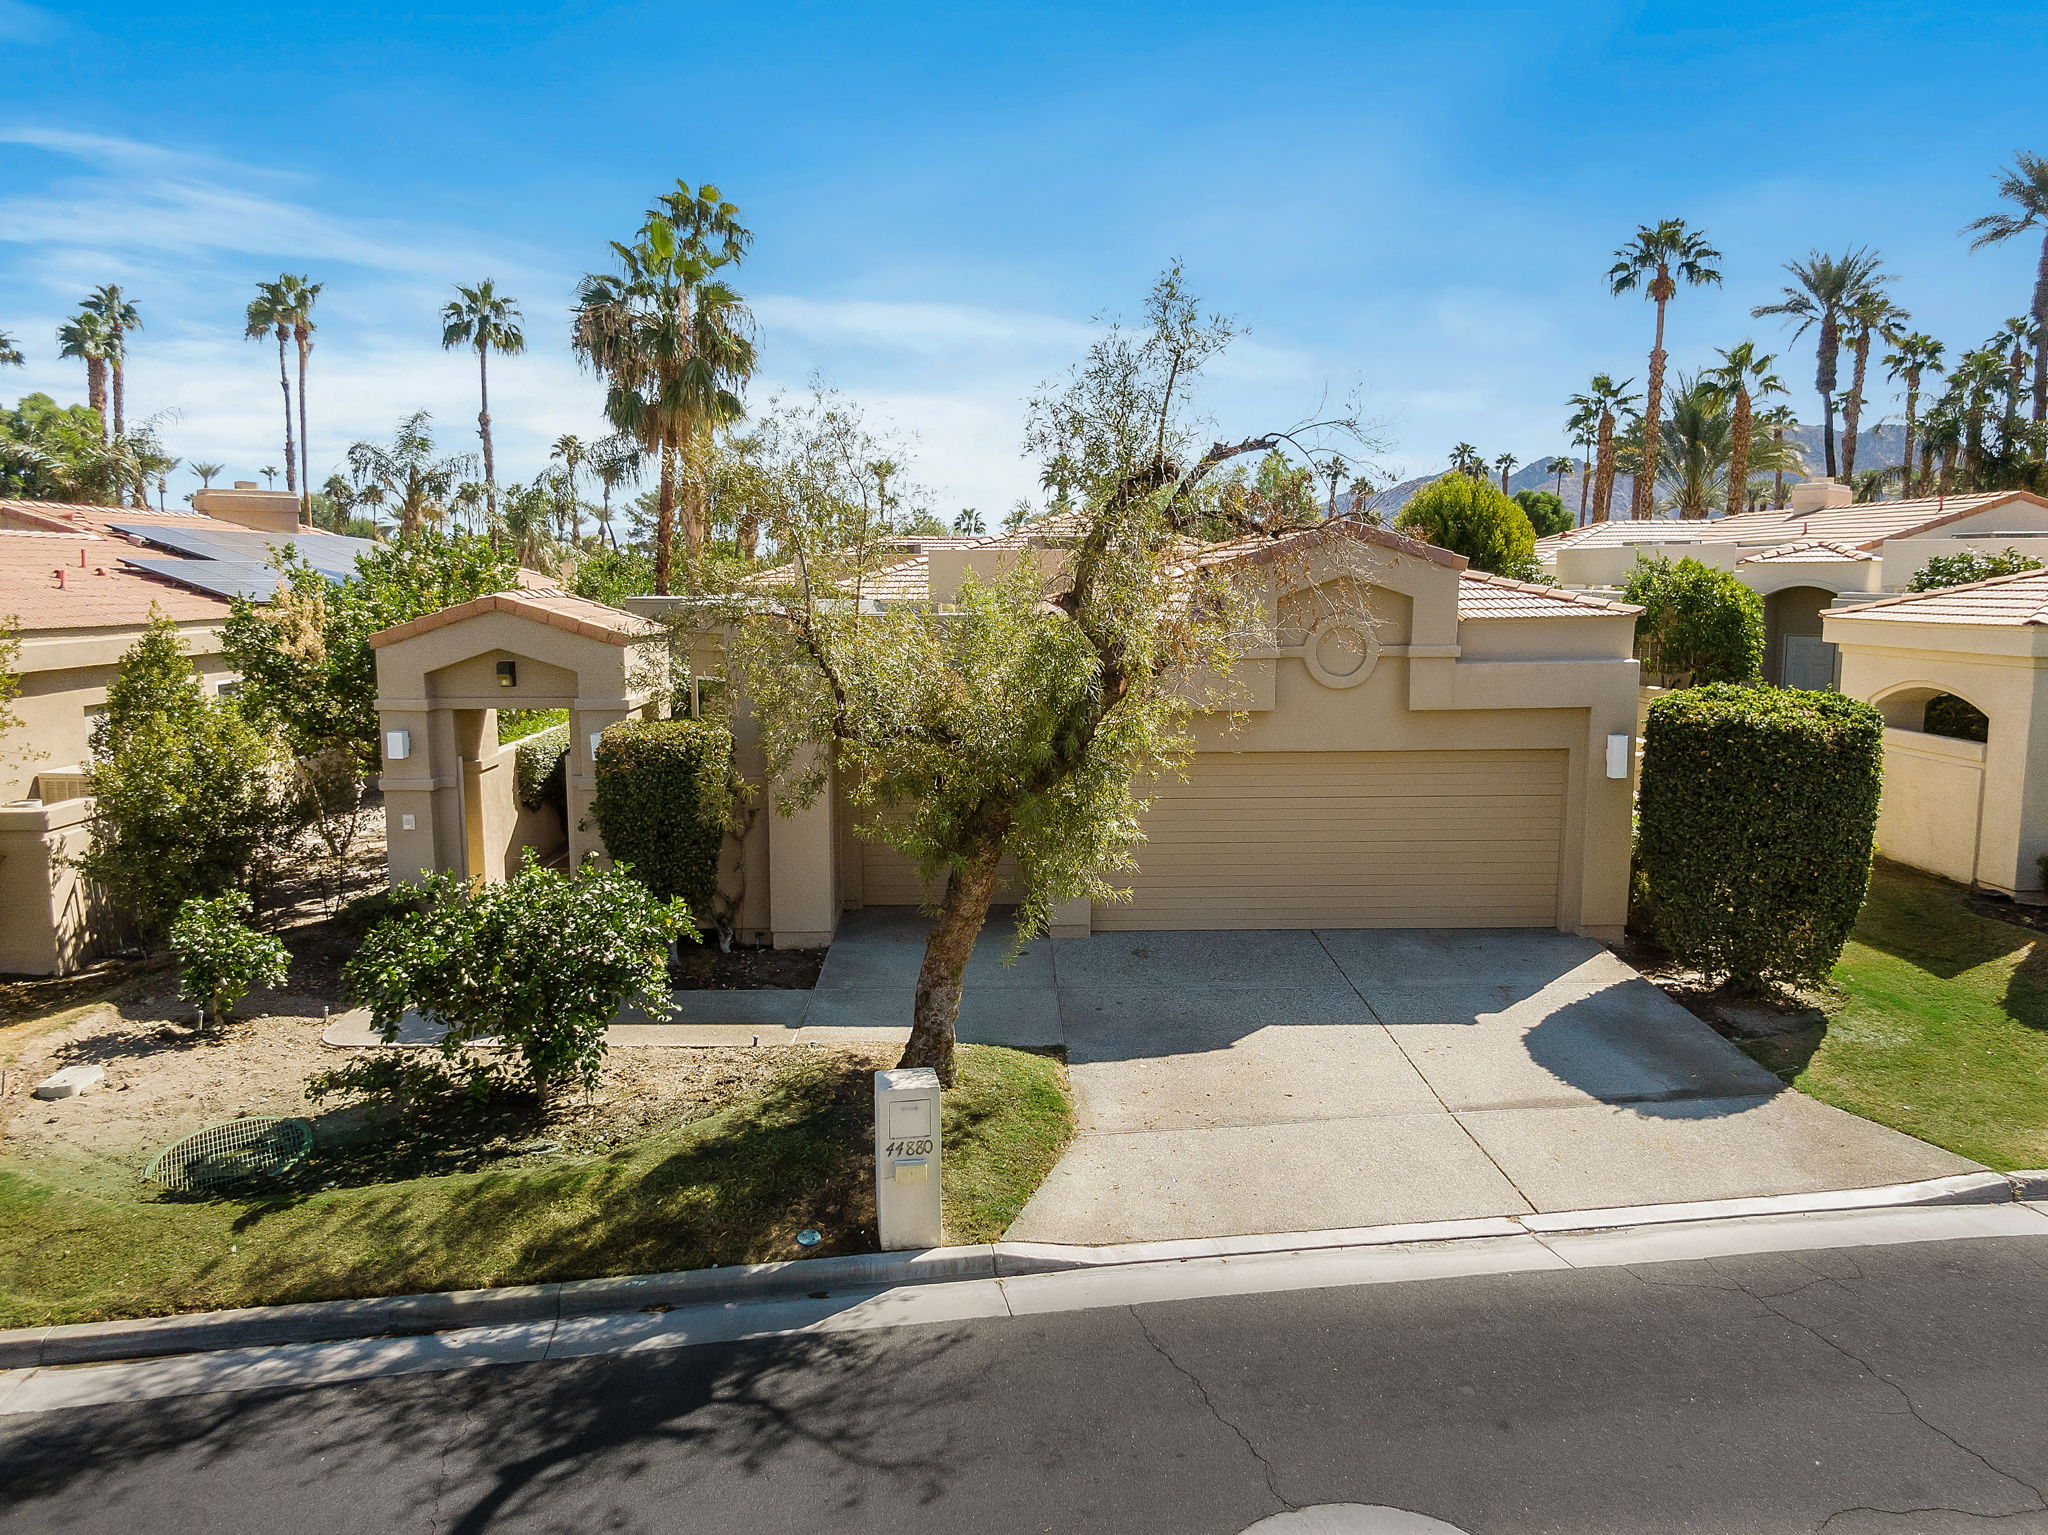  44880 Lakeside Dr, Indian Wells, CA 92210, US